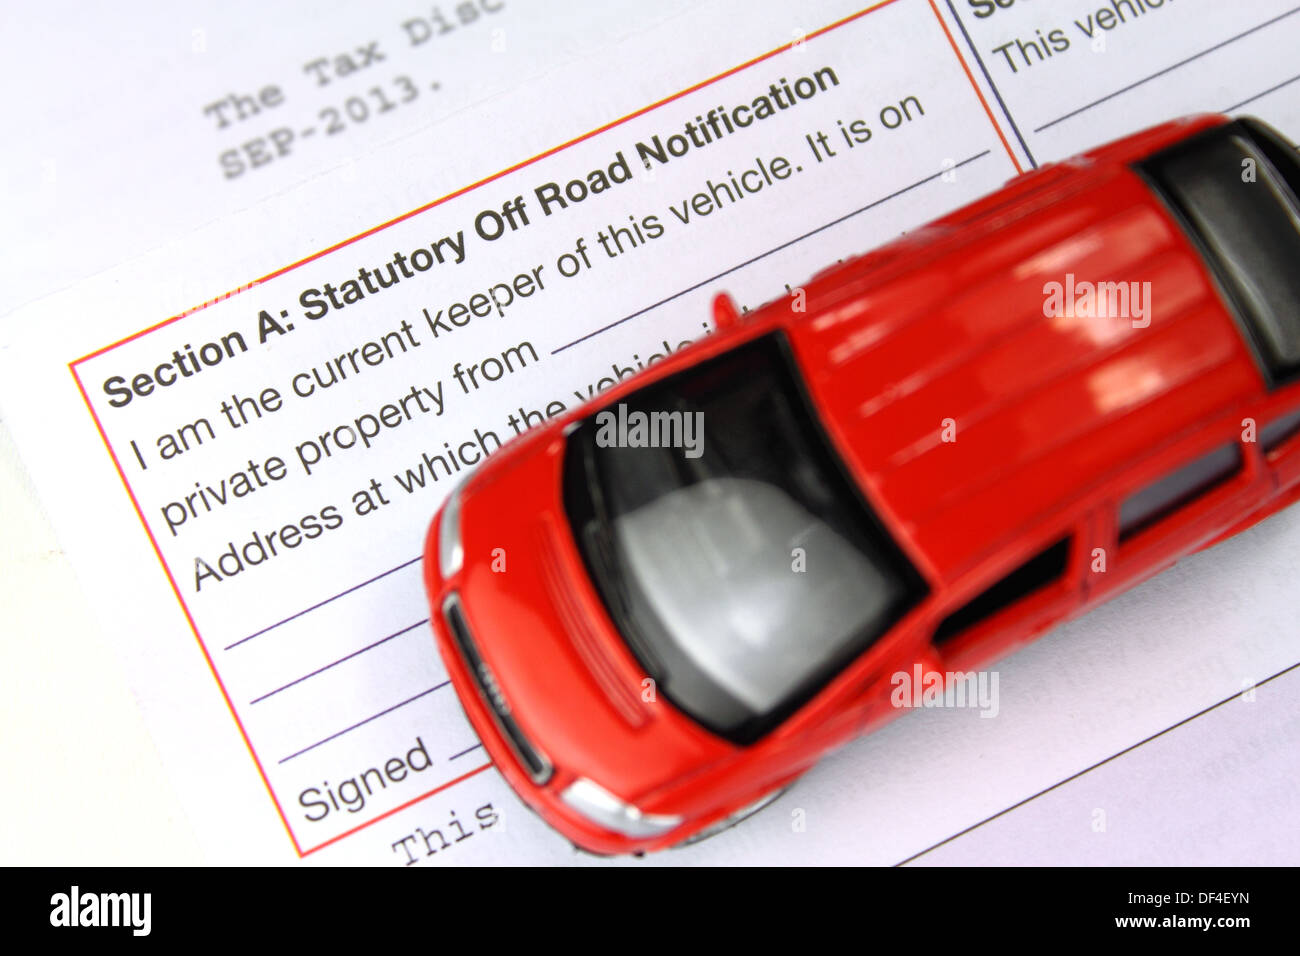 Statutory Off Road Notification (SORN) form and red toy car Stock Photo